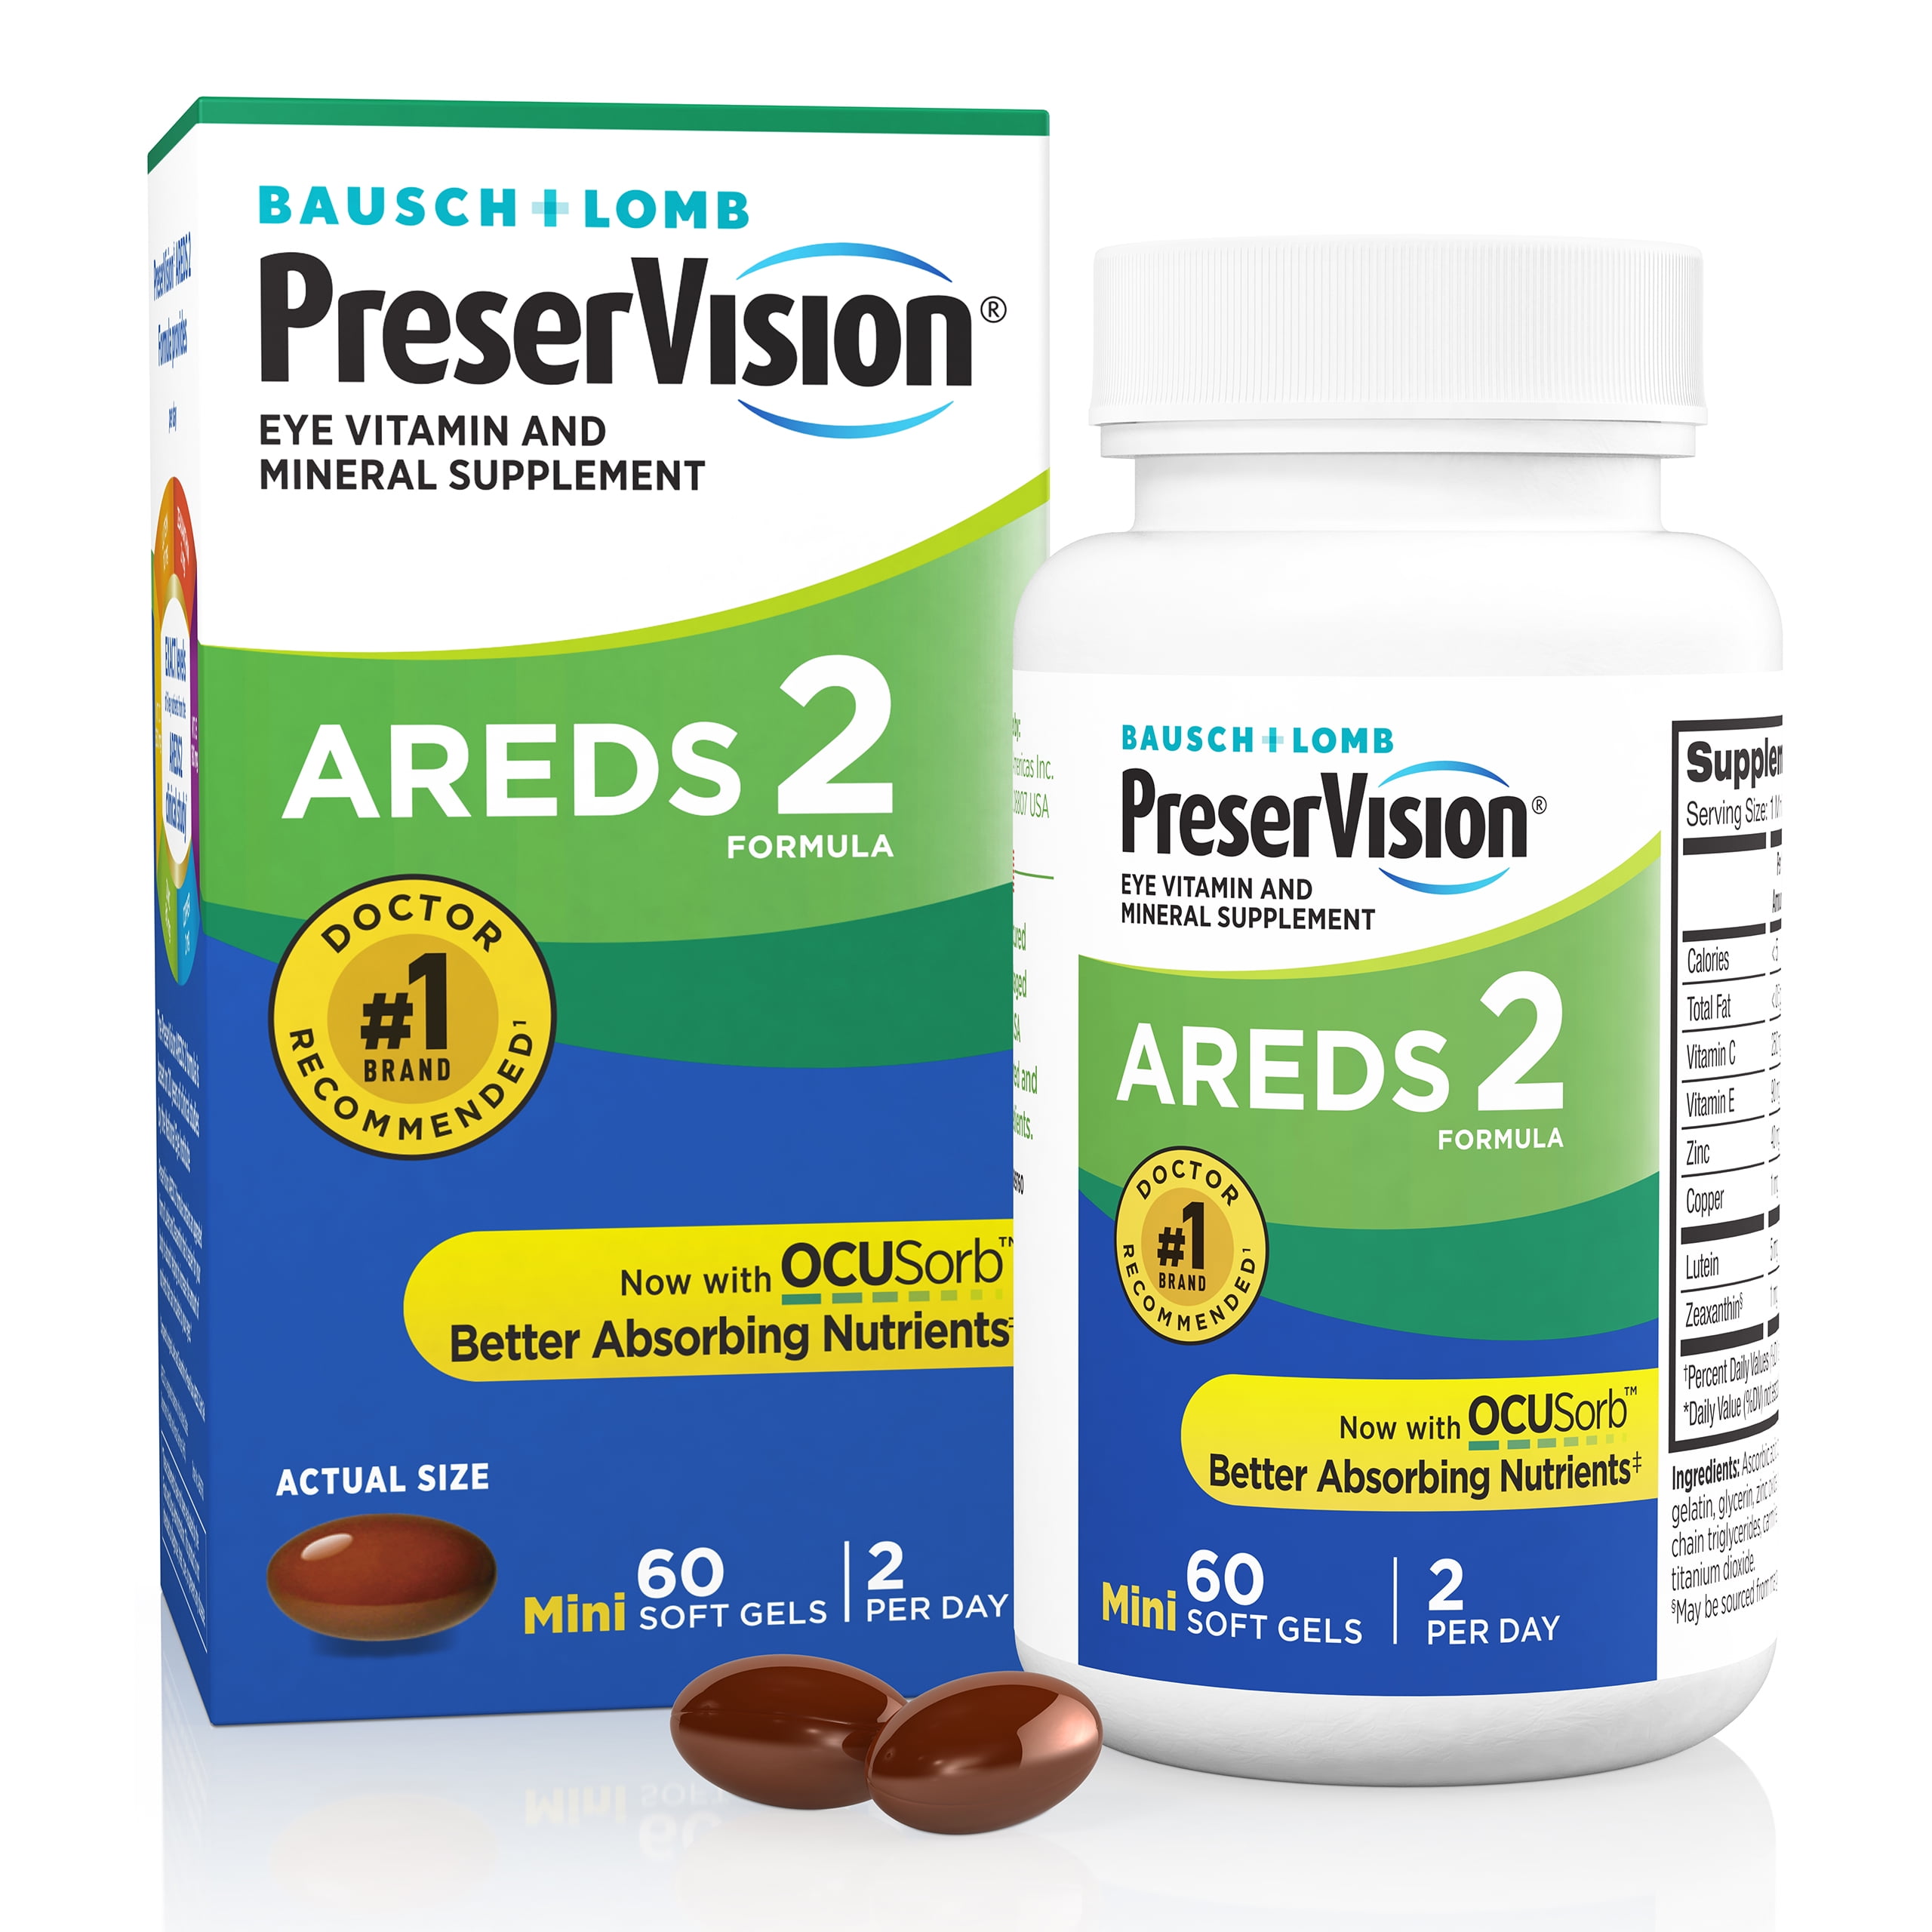 PreserVision AREDS 2 Formula + Multivitamin, Eye Vitamin and Mineral Supplement with Lutein & ZeaxanthinFrom Bausch + Lomb, 60 Soft Gels (MiniGels)